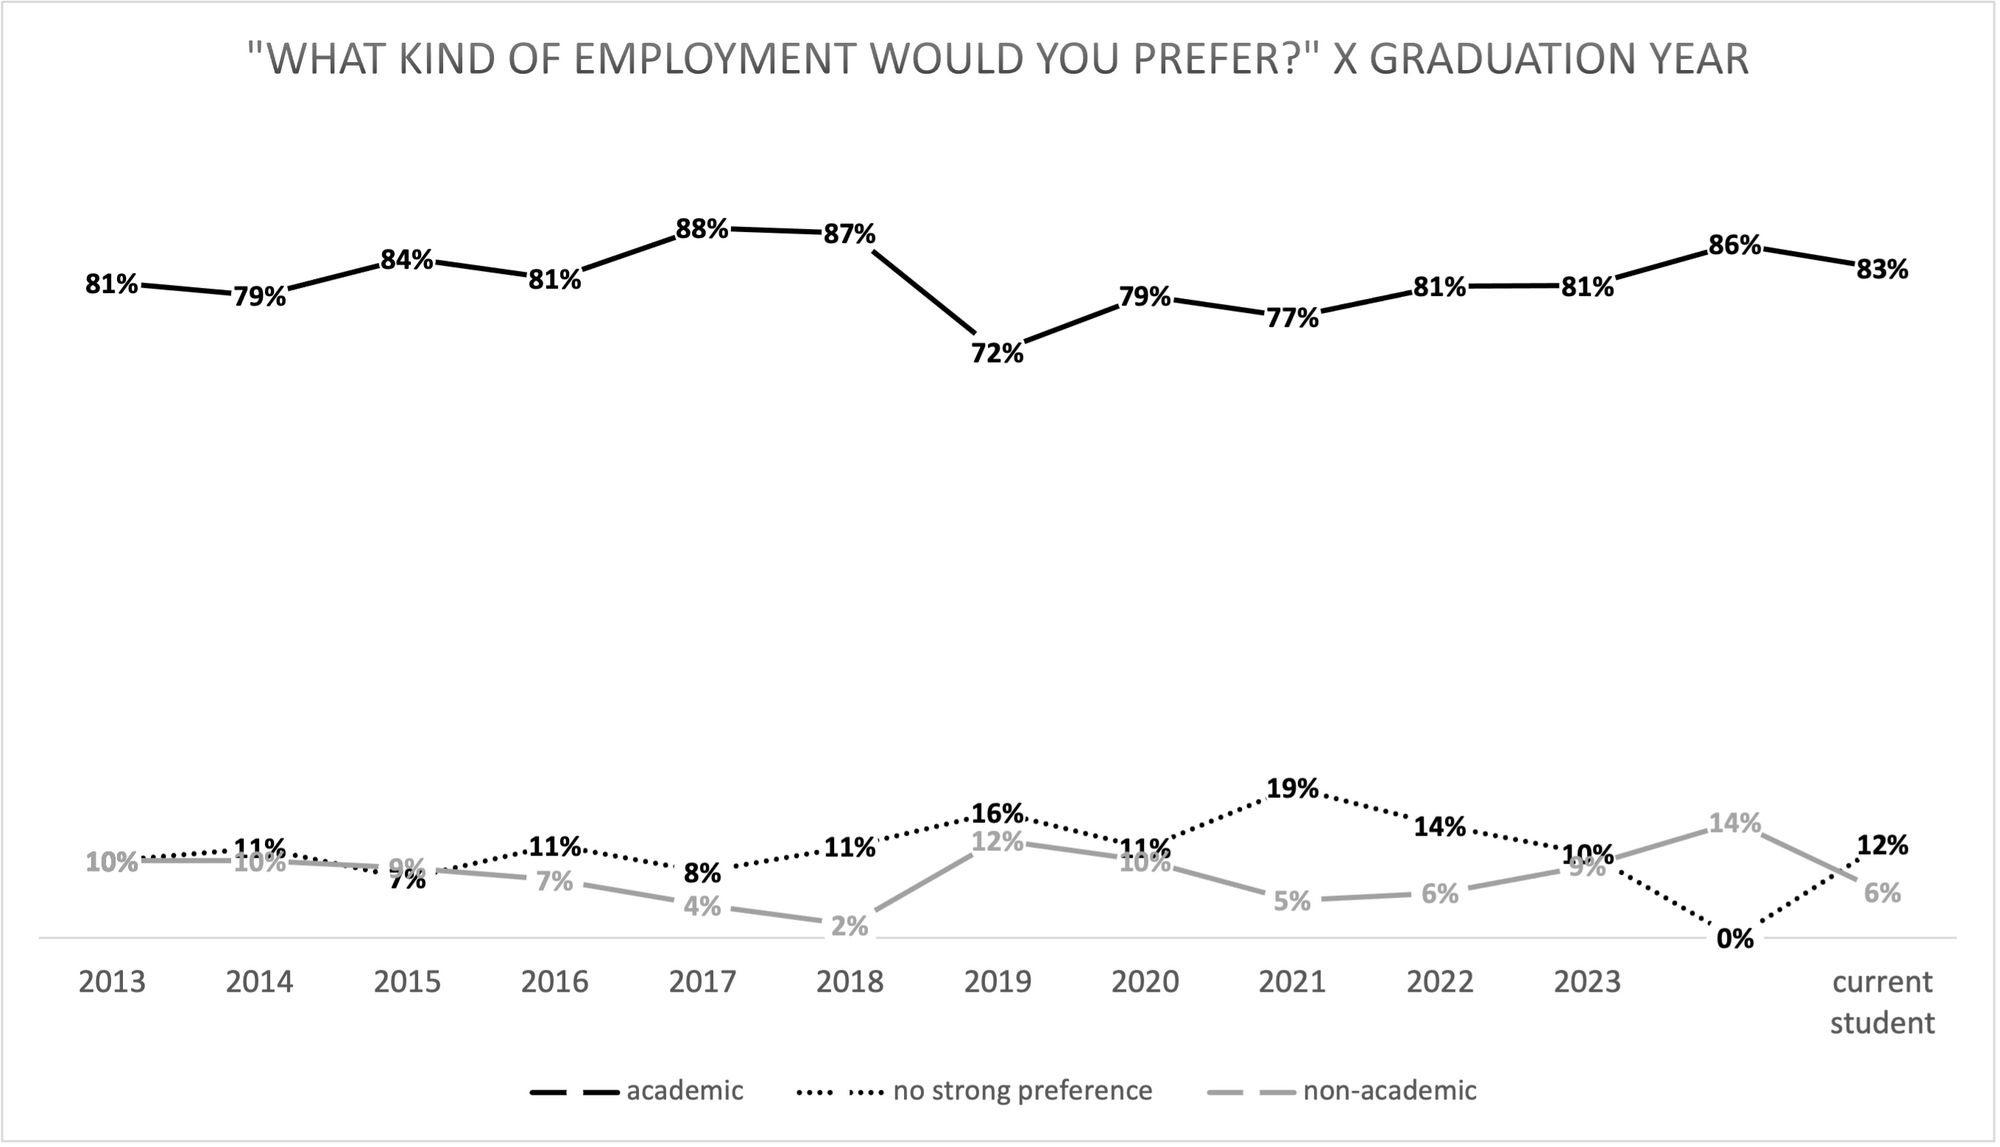 a chart showing employment preferences for different job types by graduation year